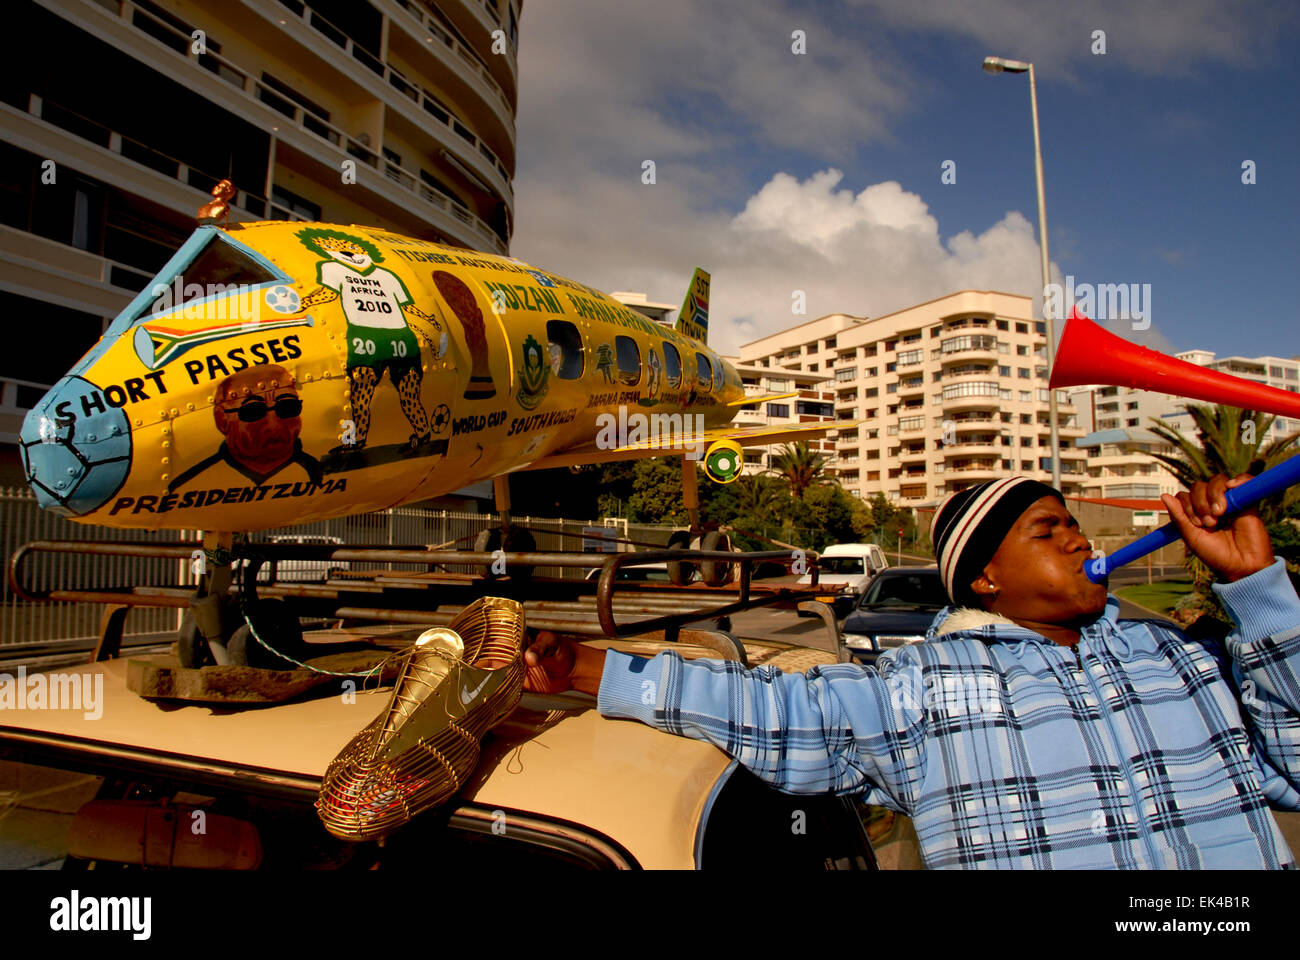 A man blows a vuvuzela next to  his car with a home made areoplane on the car to celebrebrate the 2010 FIFA World Cup in South Africa, Sea Point, Cape Town 09.06.2010. The aeroplane is made by Mboneli Lefty Booi and Siseko Christopher Kameso, both from Khayelitsha, a township in Cape Town.The plane is handmade and designed by them. It has been hand painted with a picture of Mandela, zakumi ( the south African world cup mascot), Zuma, Bafana Bafana etc It has all the flags painted on it of the countries taking part. They also made the boot. Their wish was,  “ we would like support from governme Stock Photo